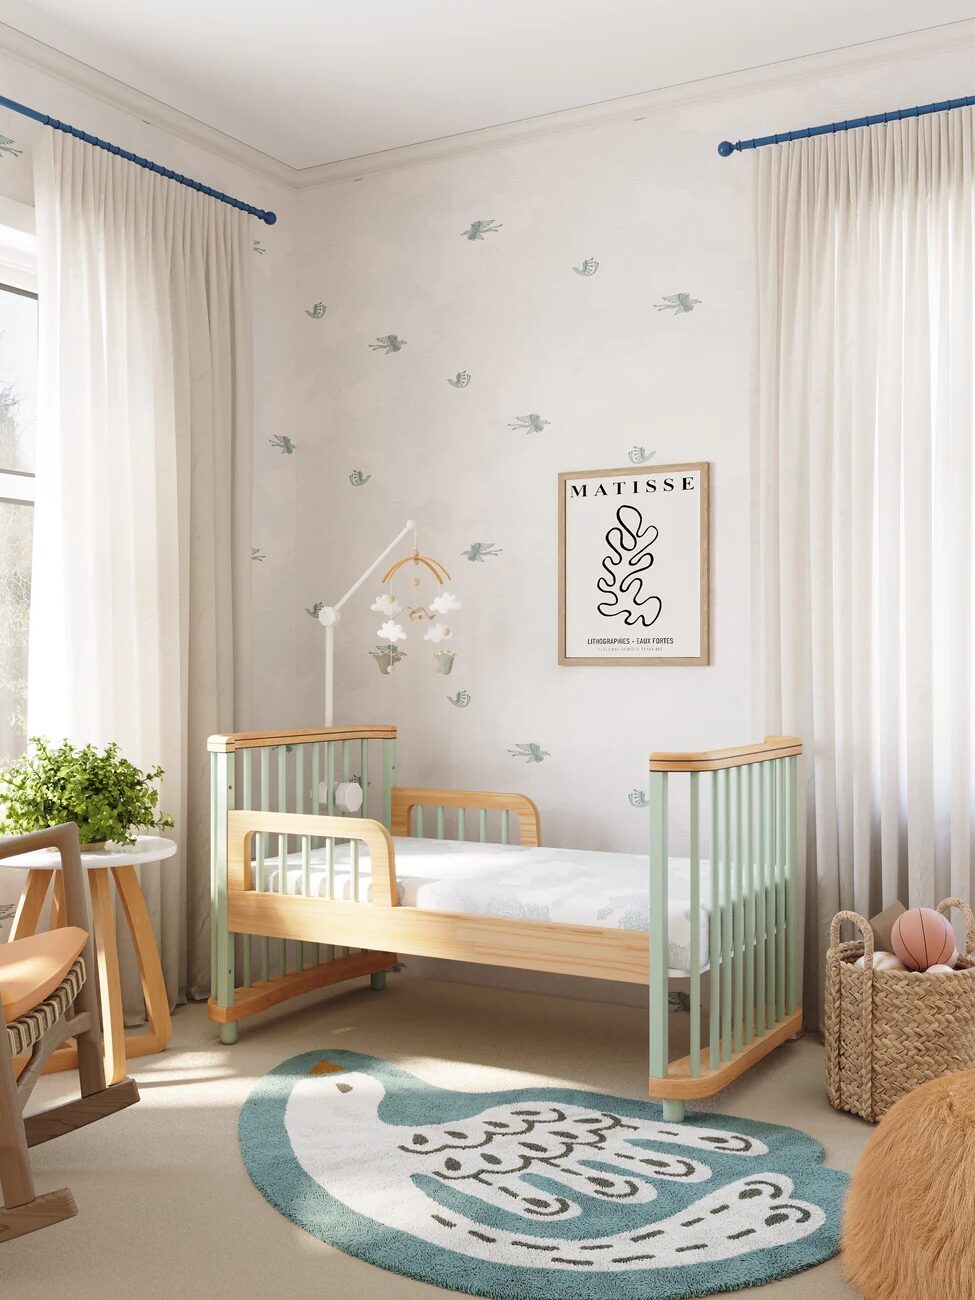 Toddler bed in mint green and natural wood in a bedroom